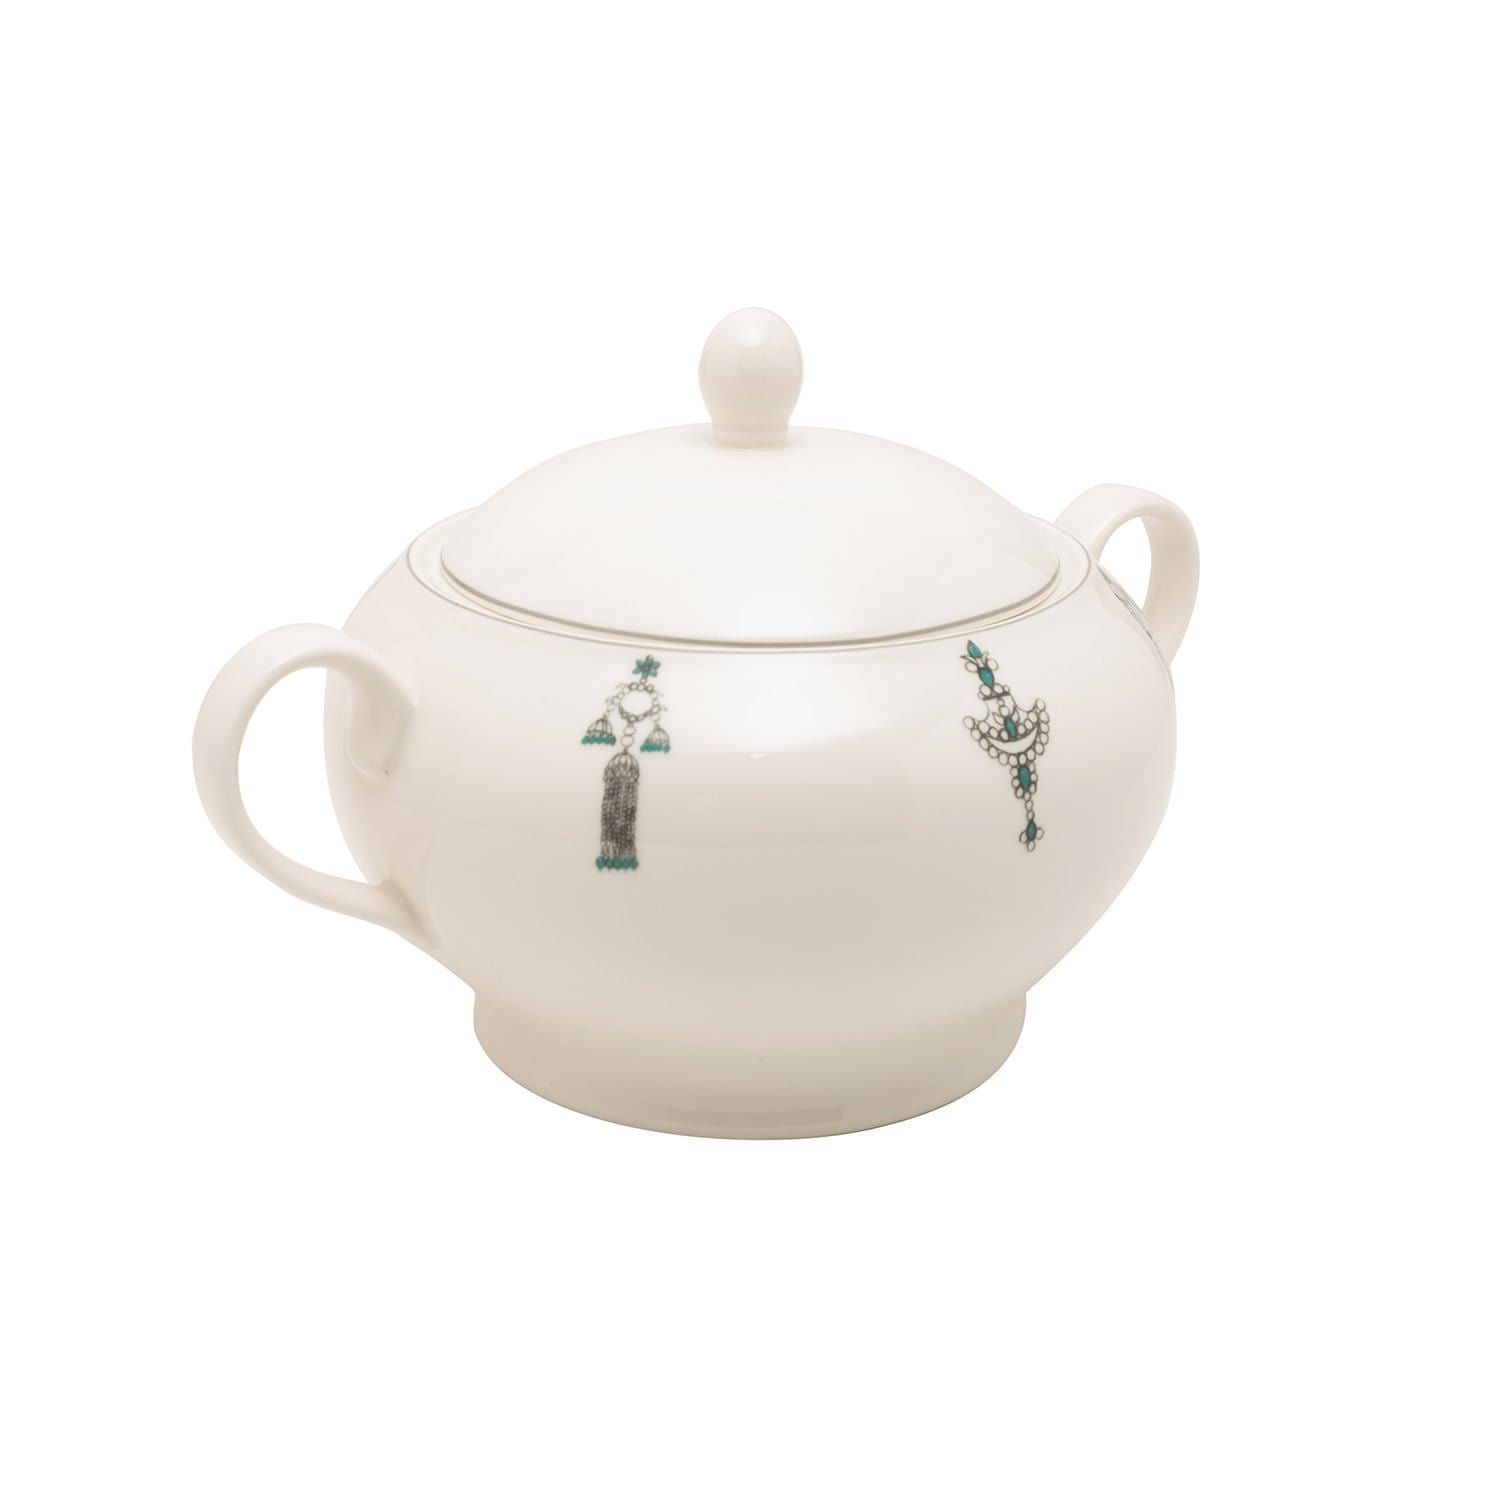 L'atelier FB Emerald Soup Tureen with Lid - 2800 cc. - TC 4711 015 - Jashanmal Home